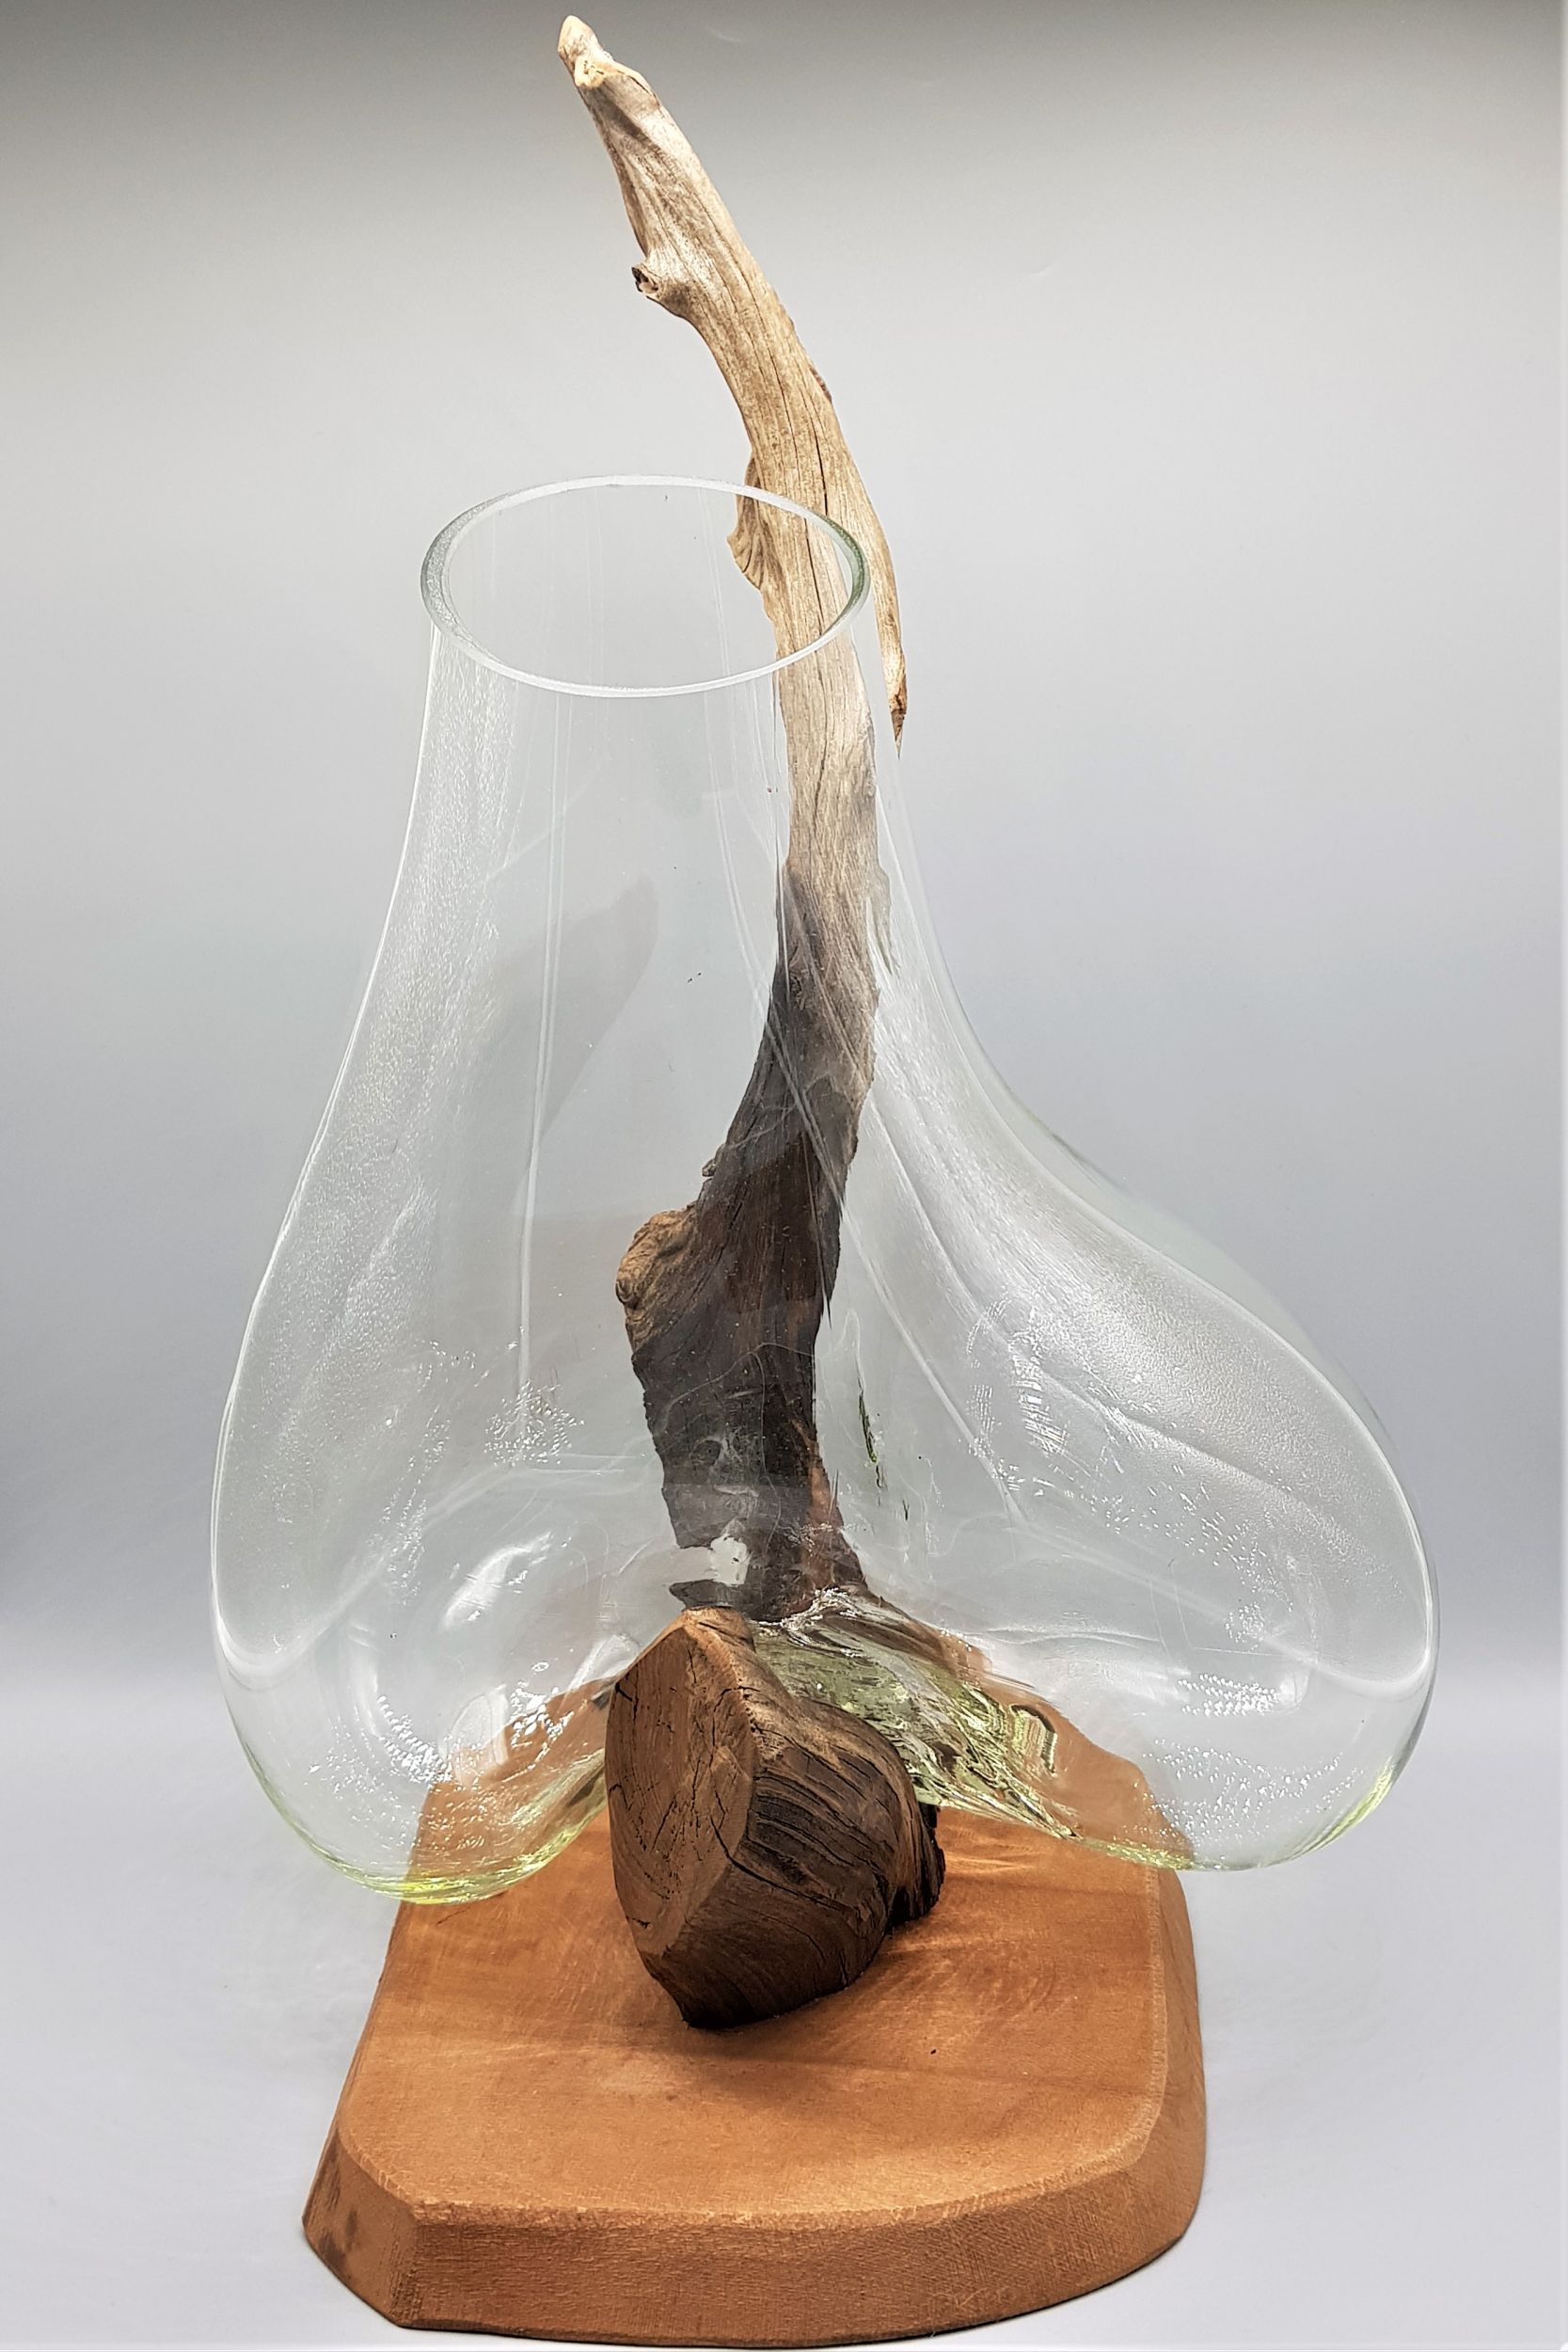 GLASS VASE ON A ROOT